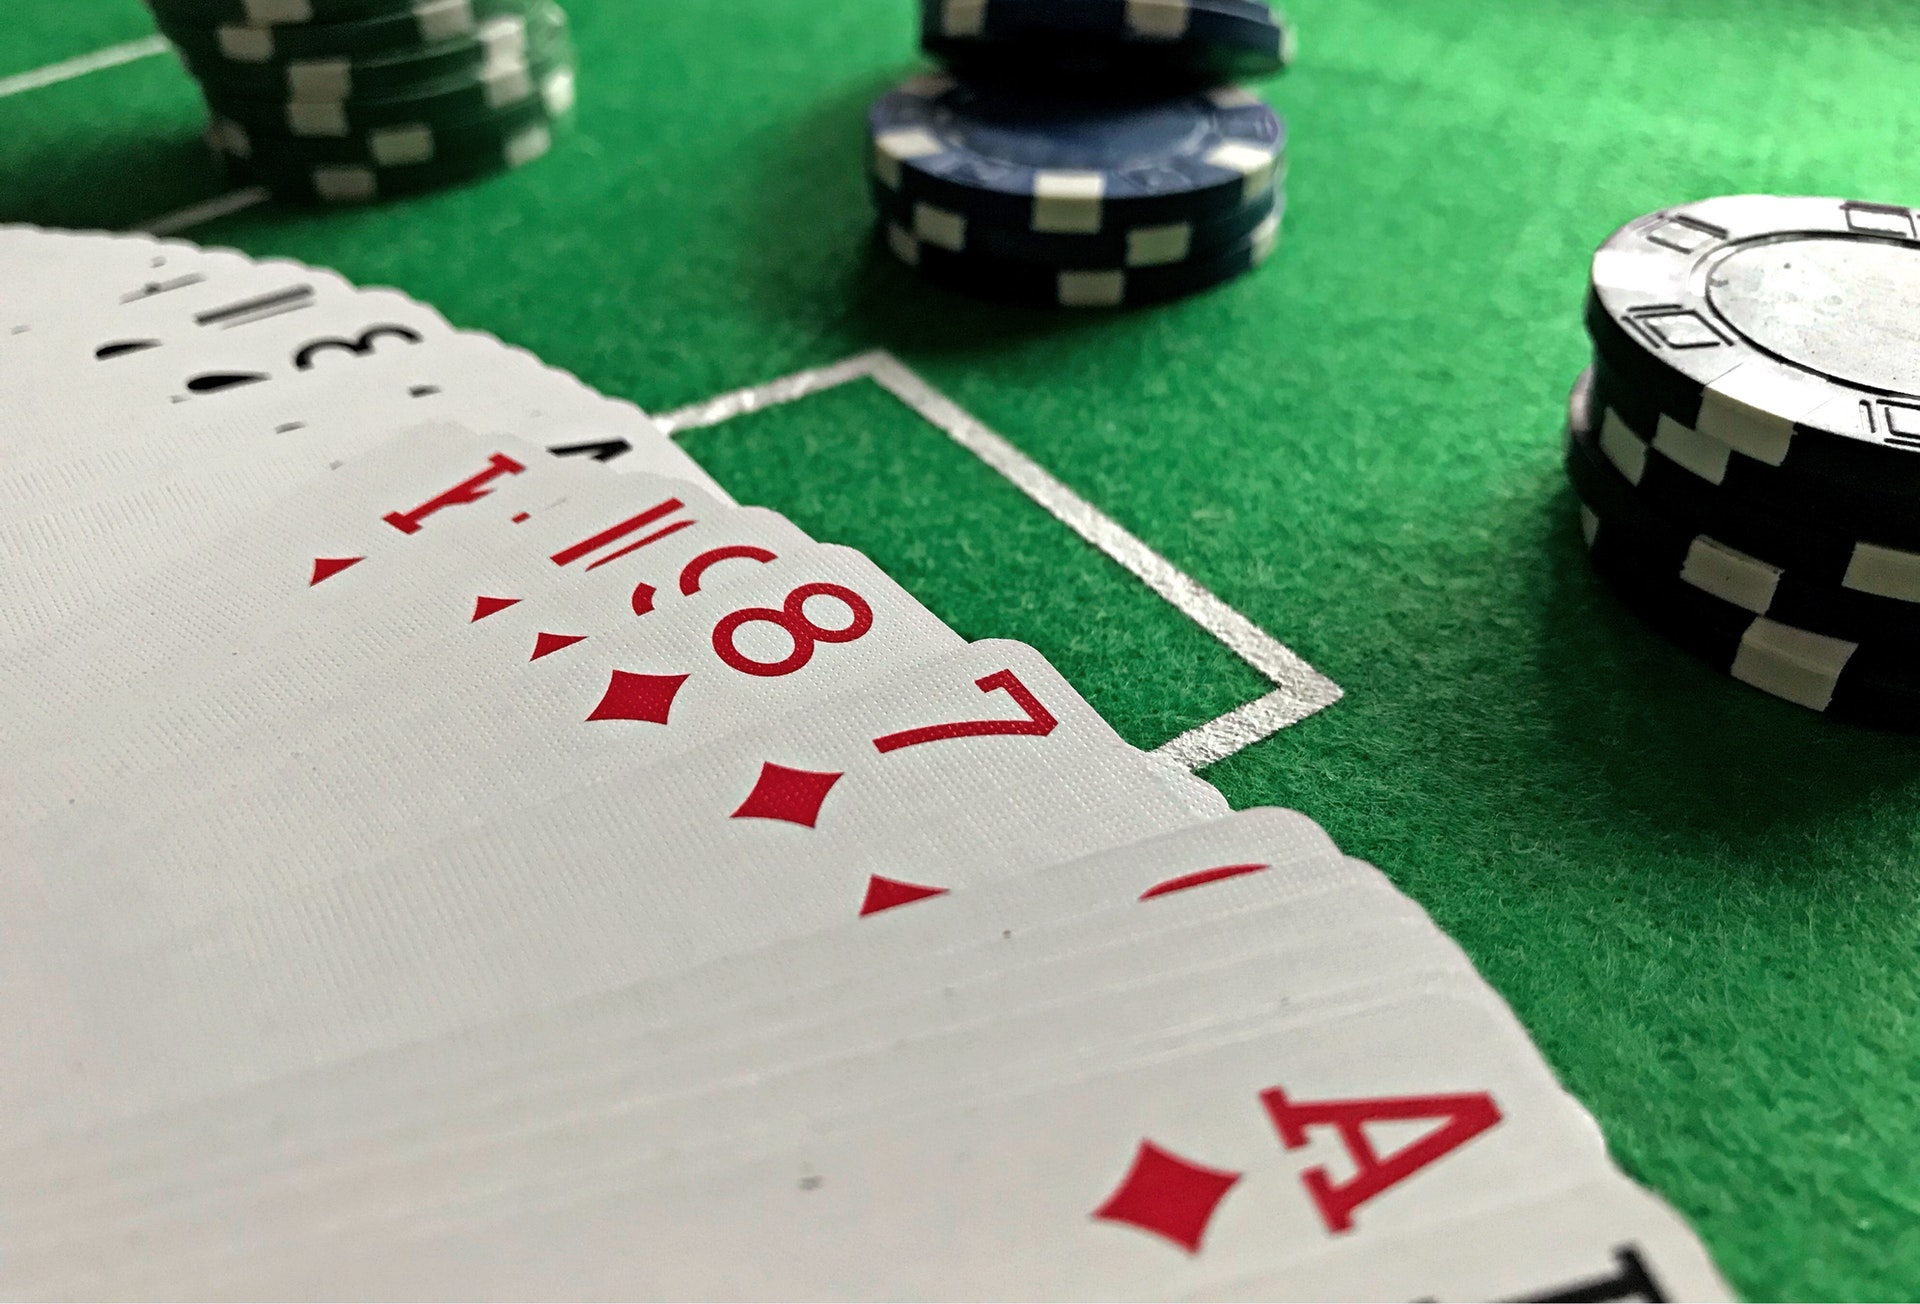 Trial Casinos allowed Sports Betting in Washington